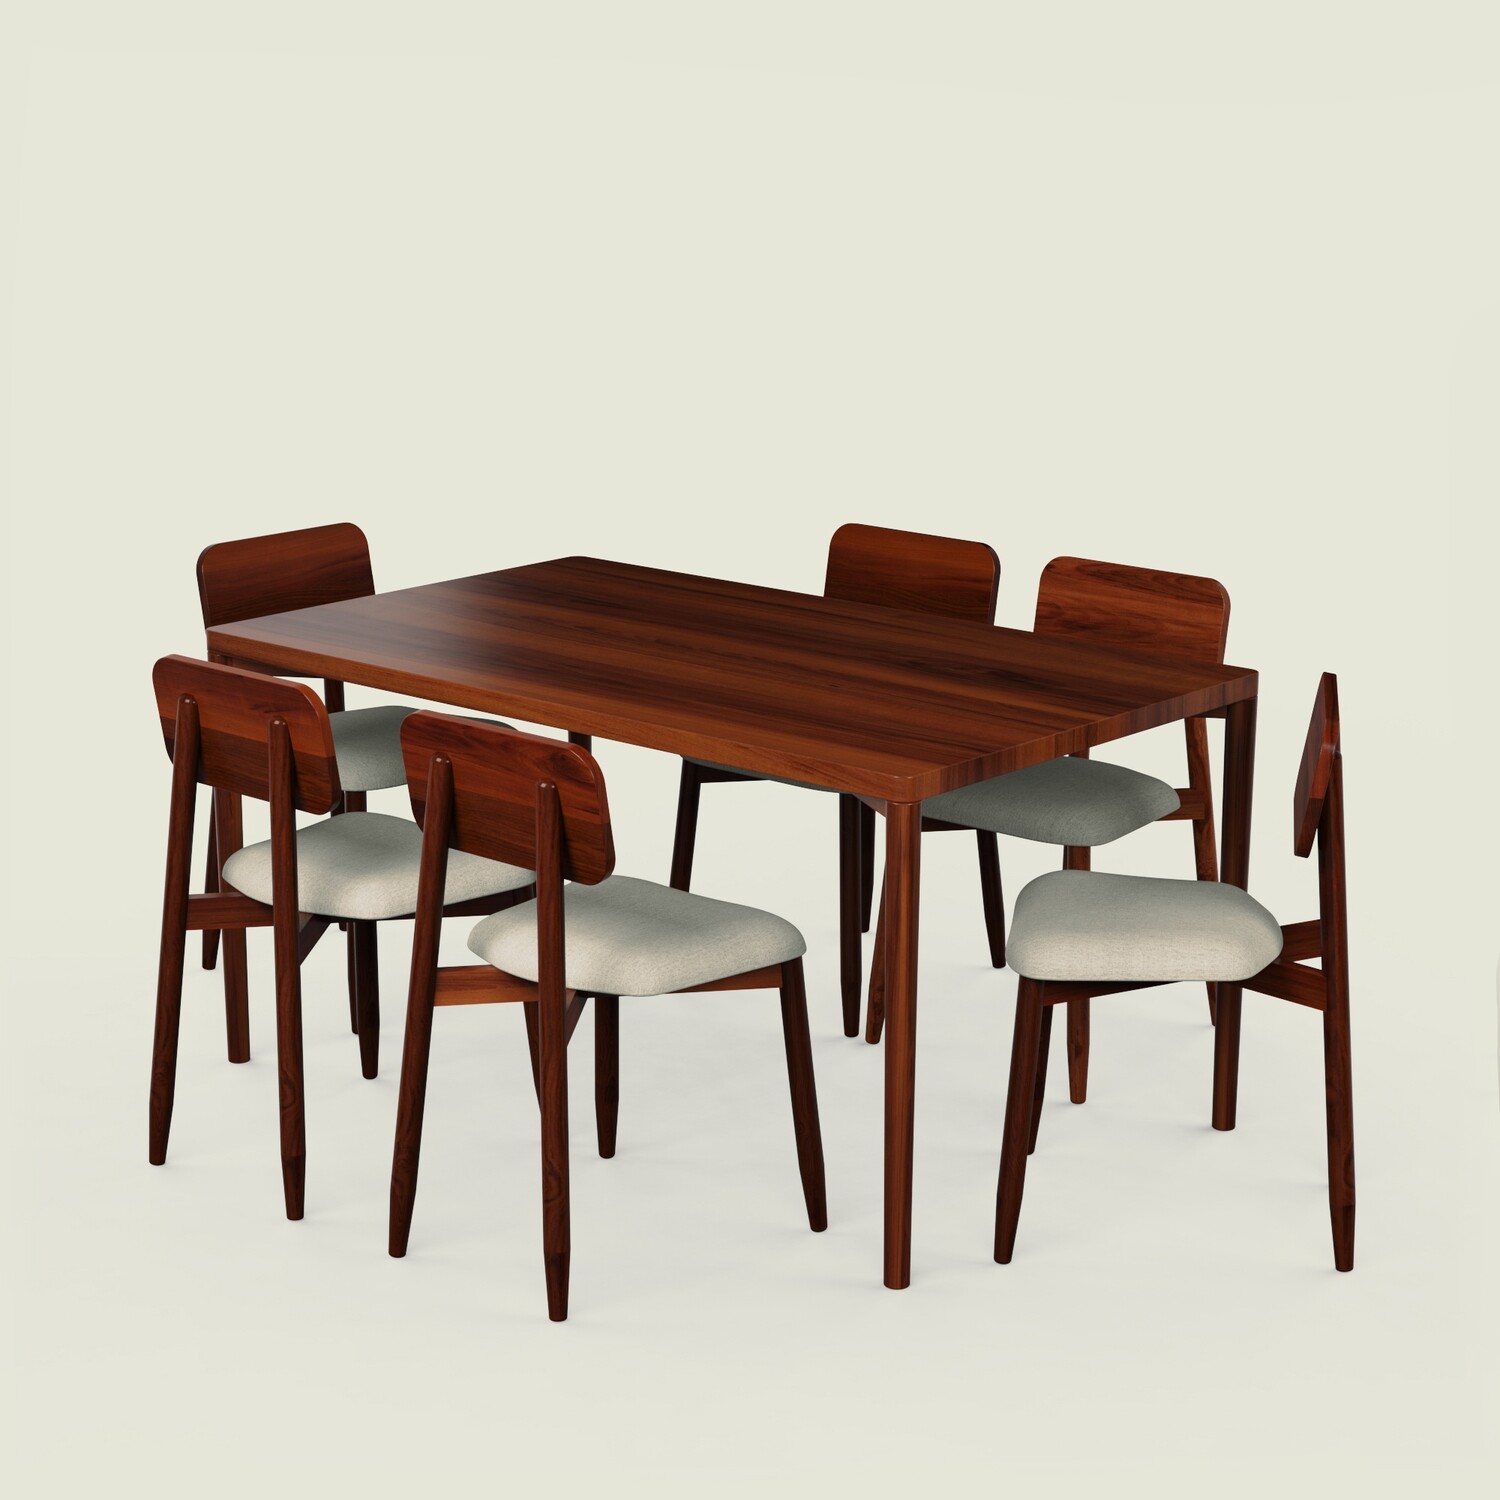 Gale Luxury Dining Table Set with Stig Upholstered Chair - 6 Seater/150 cm